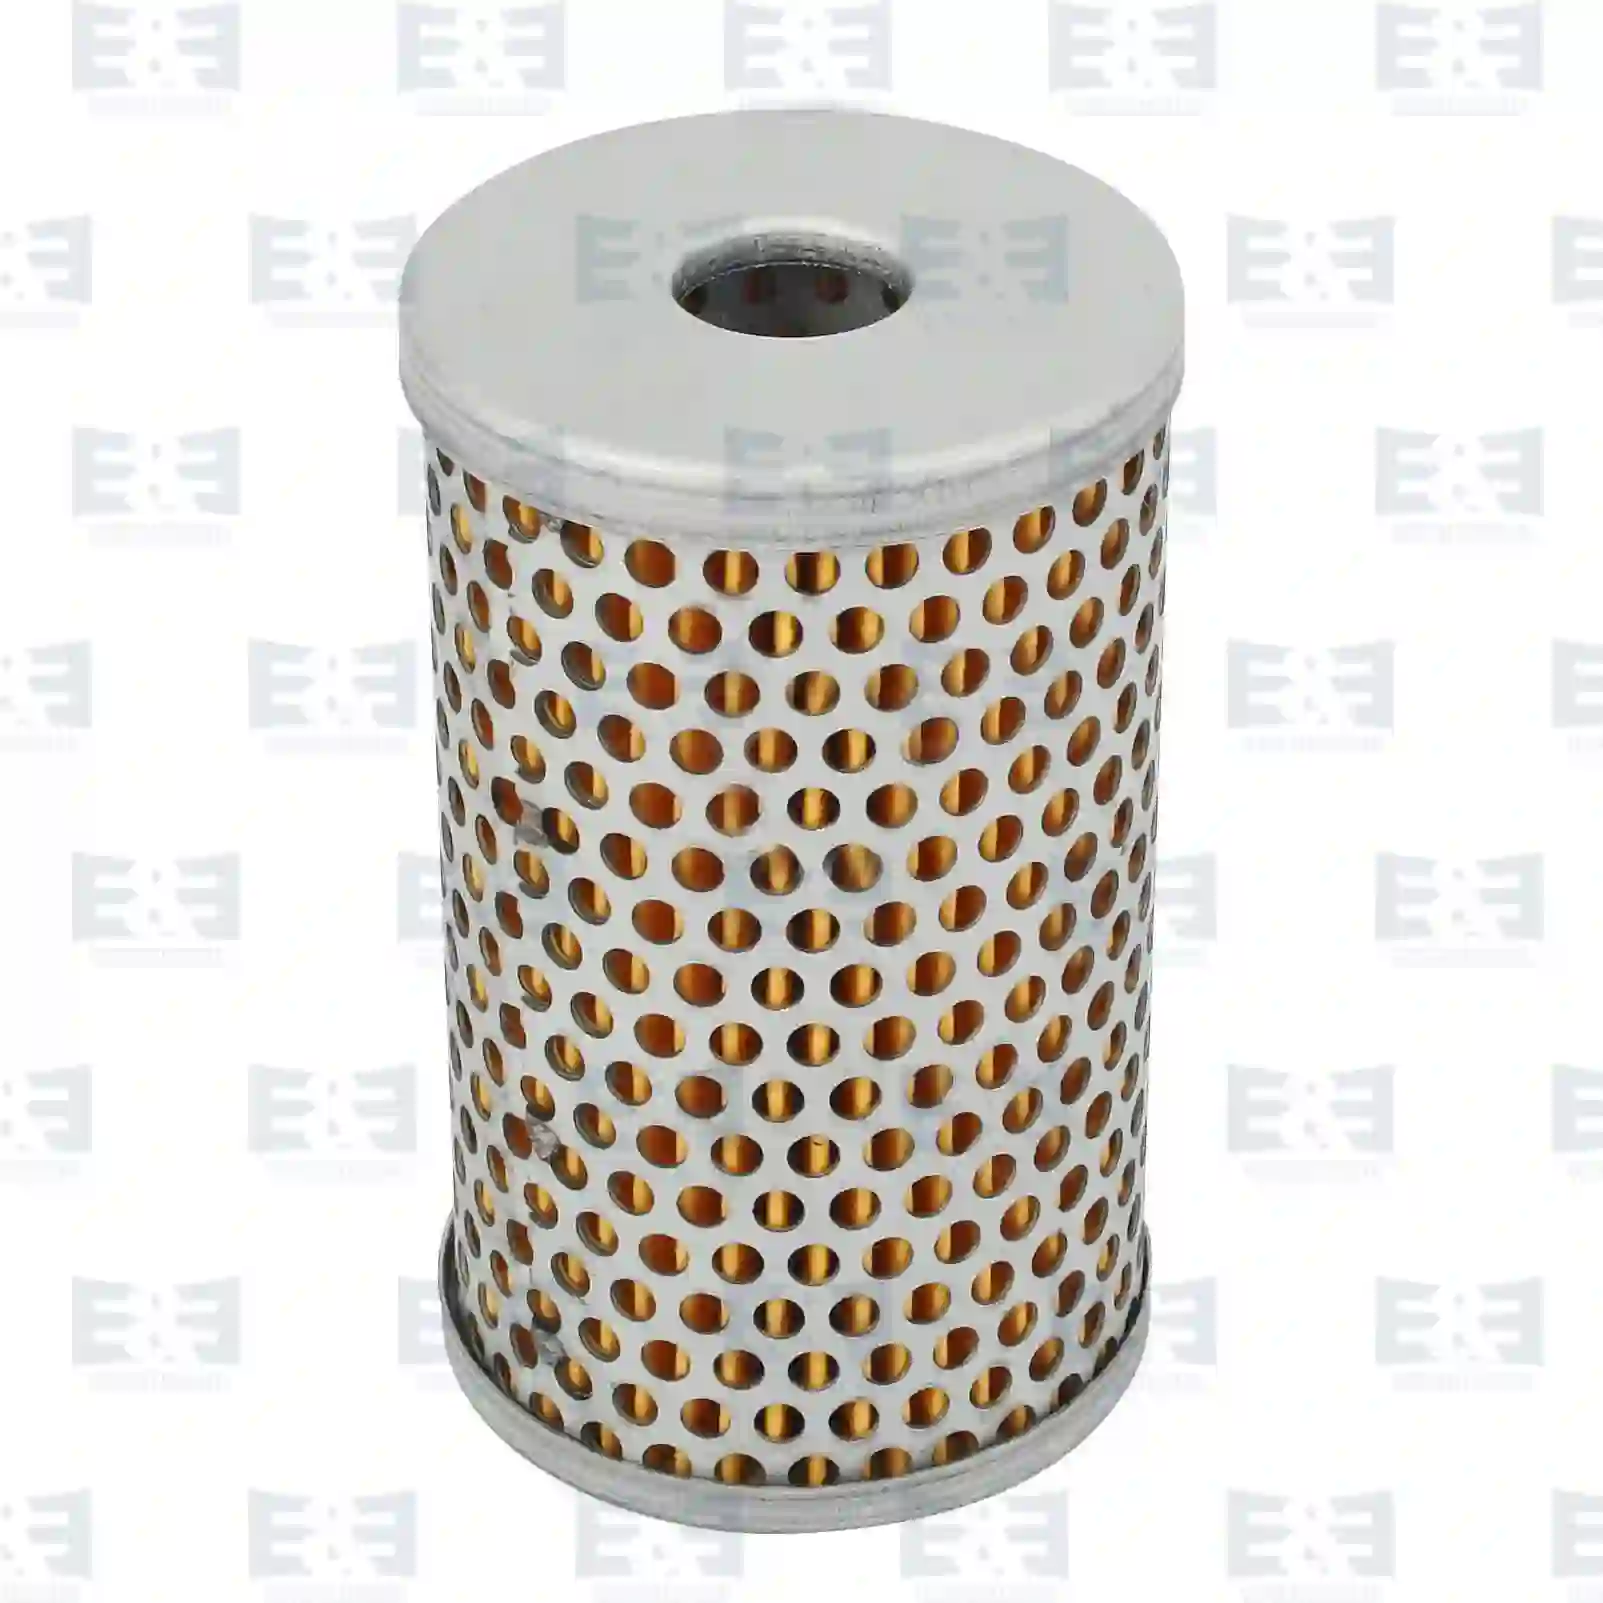 Oil Container, Steering Oil filter insert, EE No 2E2205062 ,  oem no:01902137, 02966261, T11145397, 0004662804, 0661135, 0661160, 11420661132, 11420661135, 11420661160, 11421256260, 11429061088, 11507423009, 11507425104, 32411120717, 11842225, 1842225, 1844901, 4660204, 4660604, 0229348, 1500663, 2293248, 229348, 491810, 7632141111, 905480, BBU5866, 02966251, 02966261, 2680500218, 00269661, 01902137, 02696621, 02966251, 02966261, 09914553, 42559501, 45481348, 5000674, 5000675, 5000676, 5011425, 5012553, OG0000084646, 5577966, 7984959, 9975217, 5577966, 7984260, 7984959, 93156615, 97094732, 2889829M91, 371912793, 04045601, 00966261, 01268424, 01902137, 01908082, 02696621, 02966251, 02966261, 09914553, 1902137, 2966261, 42553041, 42559501, 503120251, 5000820895, 5001018962, 02966251, 02966261, 81473016005, 81473070008, 85400003330, 2889829, 2889829M91, 0000940404, 0001184225, 0001842225, 0001842325, 0001844701, 0001844901, 0001845801, 0001846301, 0001846525, 0004660204, 0004660404, 0004660604, 0004662804, 0004663004, 0011842225, 0021841125, 1021800109, 1021840425, 8225000030, 8225000232, 013200300, 5000814407, 5000820895, 5001871595, 5021107375, 6005019563, 6005019804, 7400349619, 7420580233, 7421392404, 8499135552, HD604, 00119590, 1343242, 153465, 153468, 1953094, 8225000030, 8225000232, 1296311510, 1696311510, 5104504020, 480A4700748, 480A470060, 480A470748, 5011070580, 216230, 632114112, 15856180, 20580233, 21392404, 349619, 3496191, 3496197, 6612098, 7349619, 85103870, 2V5422384A, 400700504, T11145397, ZG03044-0008 E&E Truck Spare Parts | Truck Spare Parts, Auotomotive Spare Parts